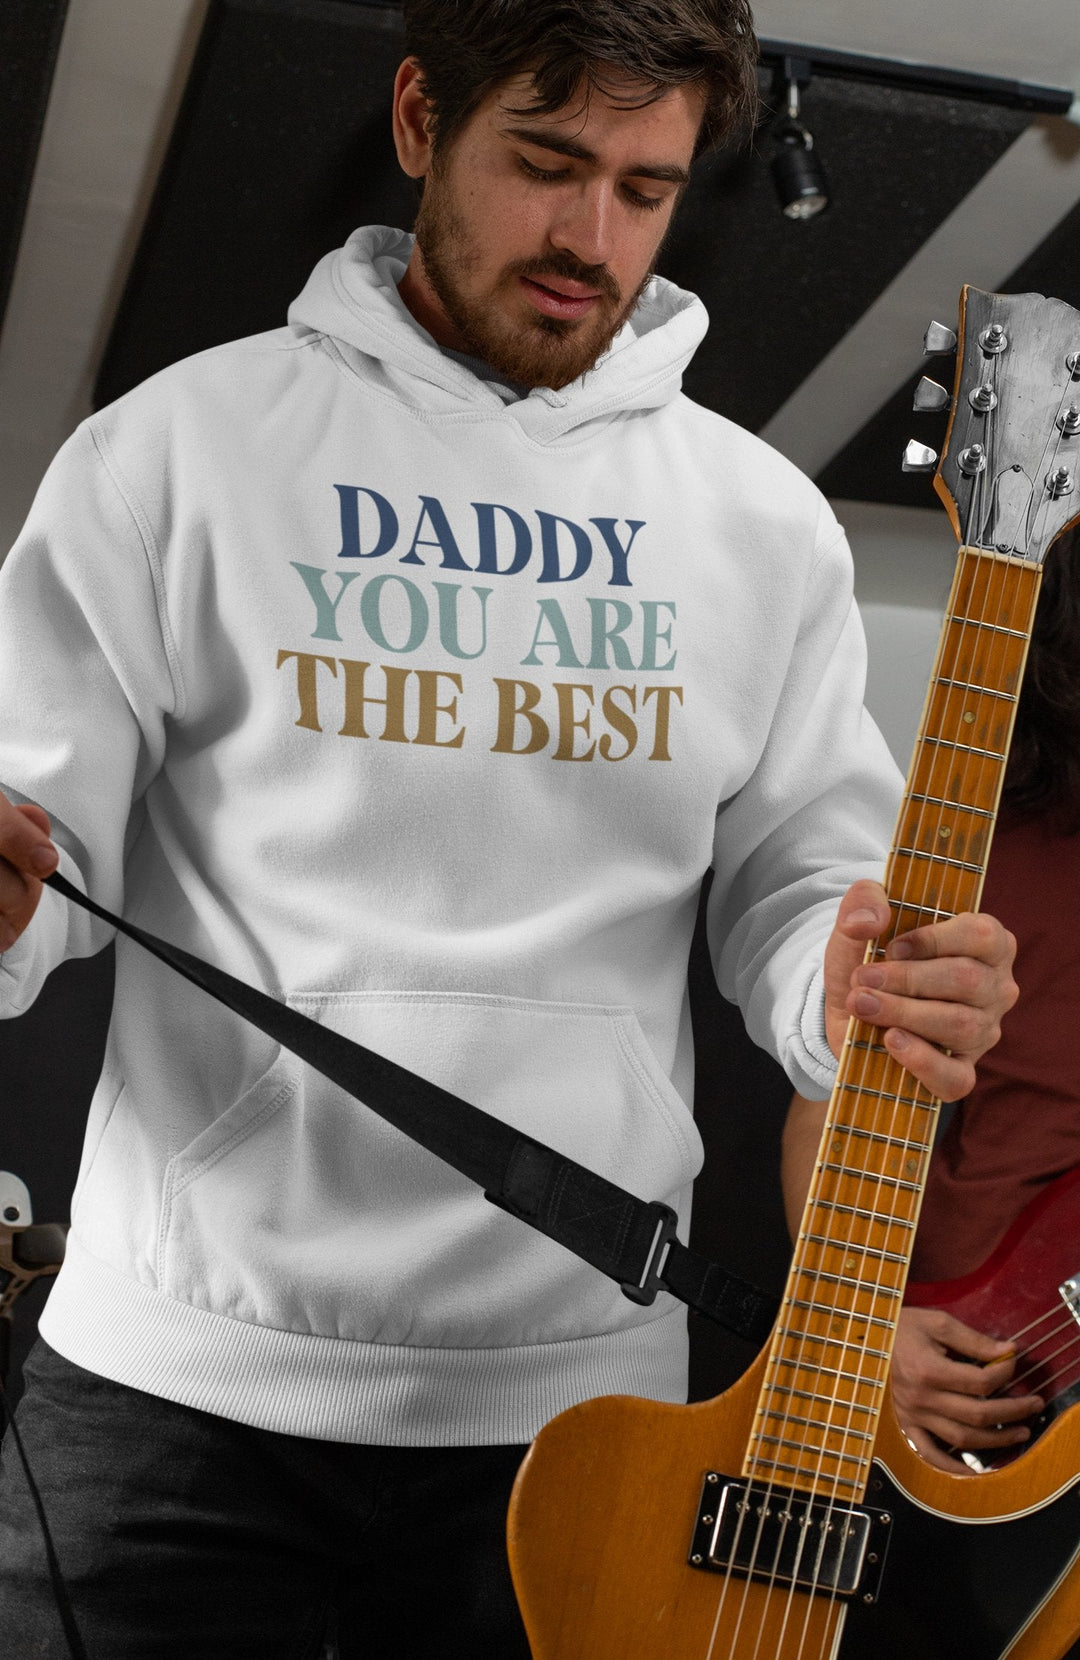 Looking for the perfect Father's Day gift? Or just a gift for dad? Explore our collection of stylish and comfortable custom hoodies for men. Our hoodies are made with high-quality materials and designed with the modern dad in mind.  